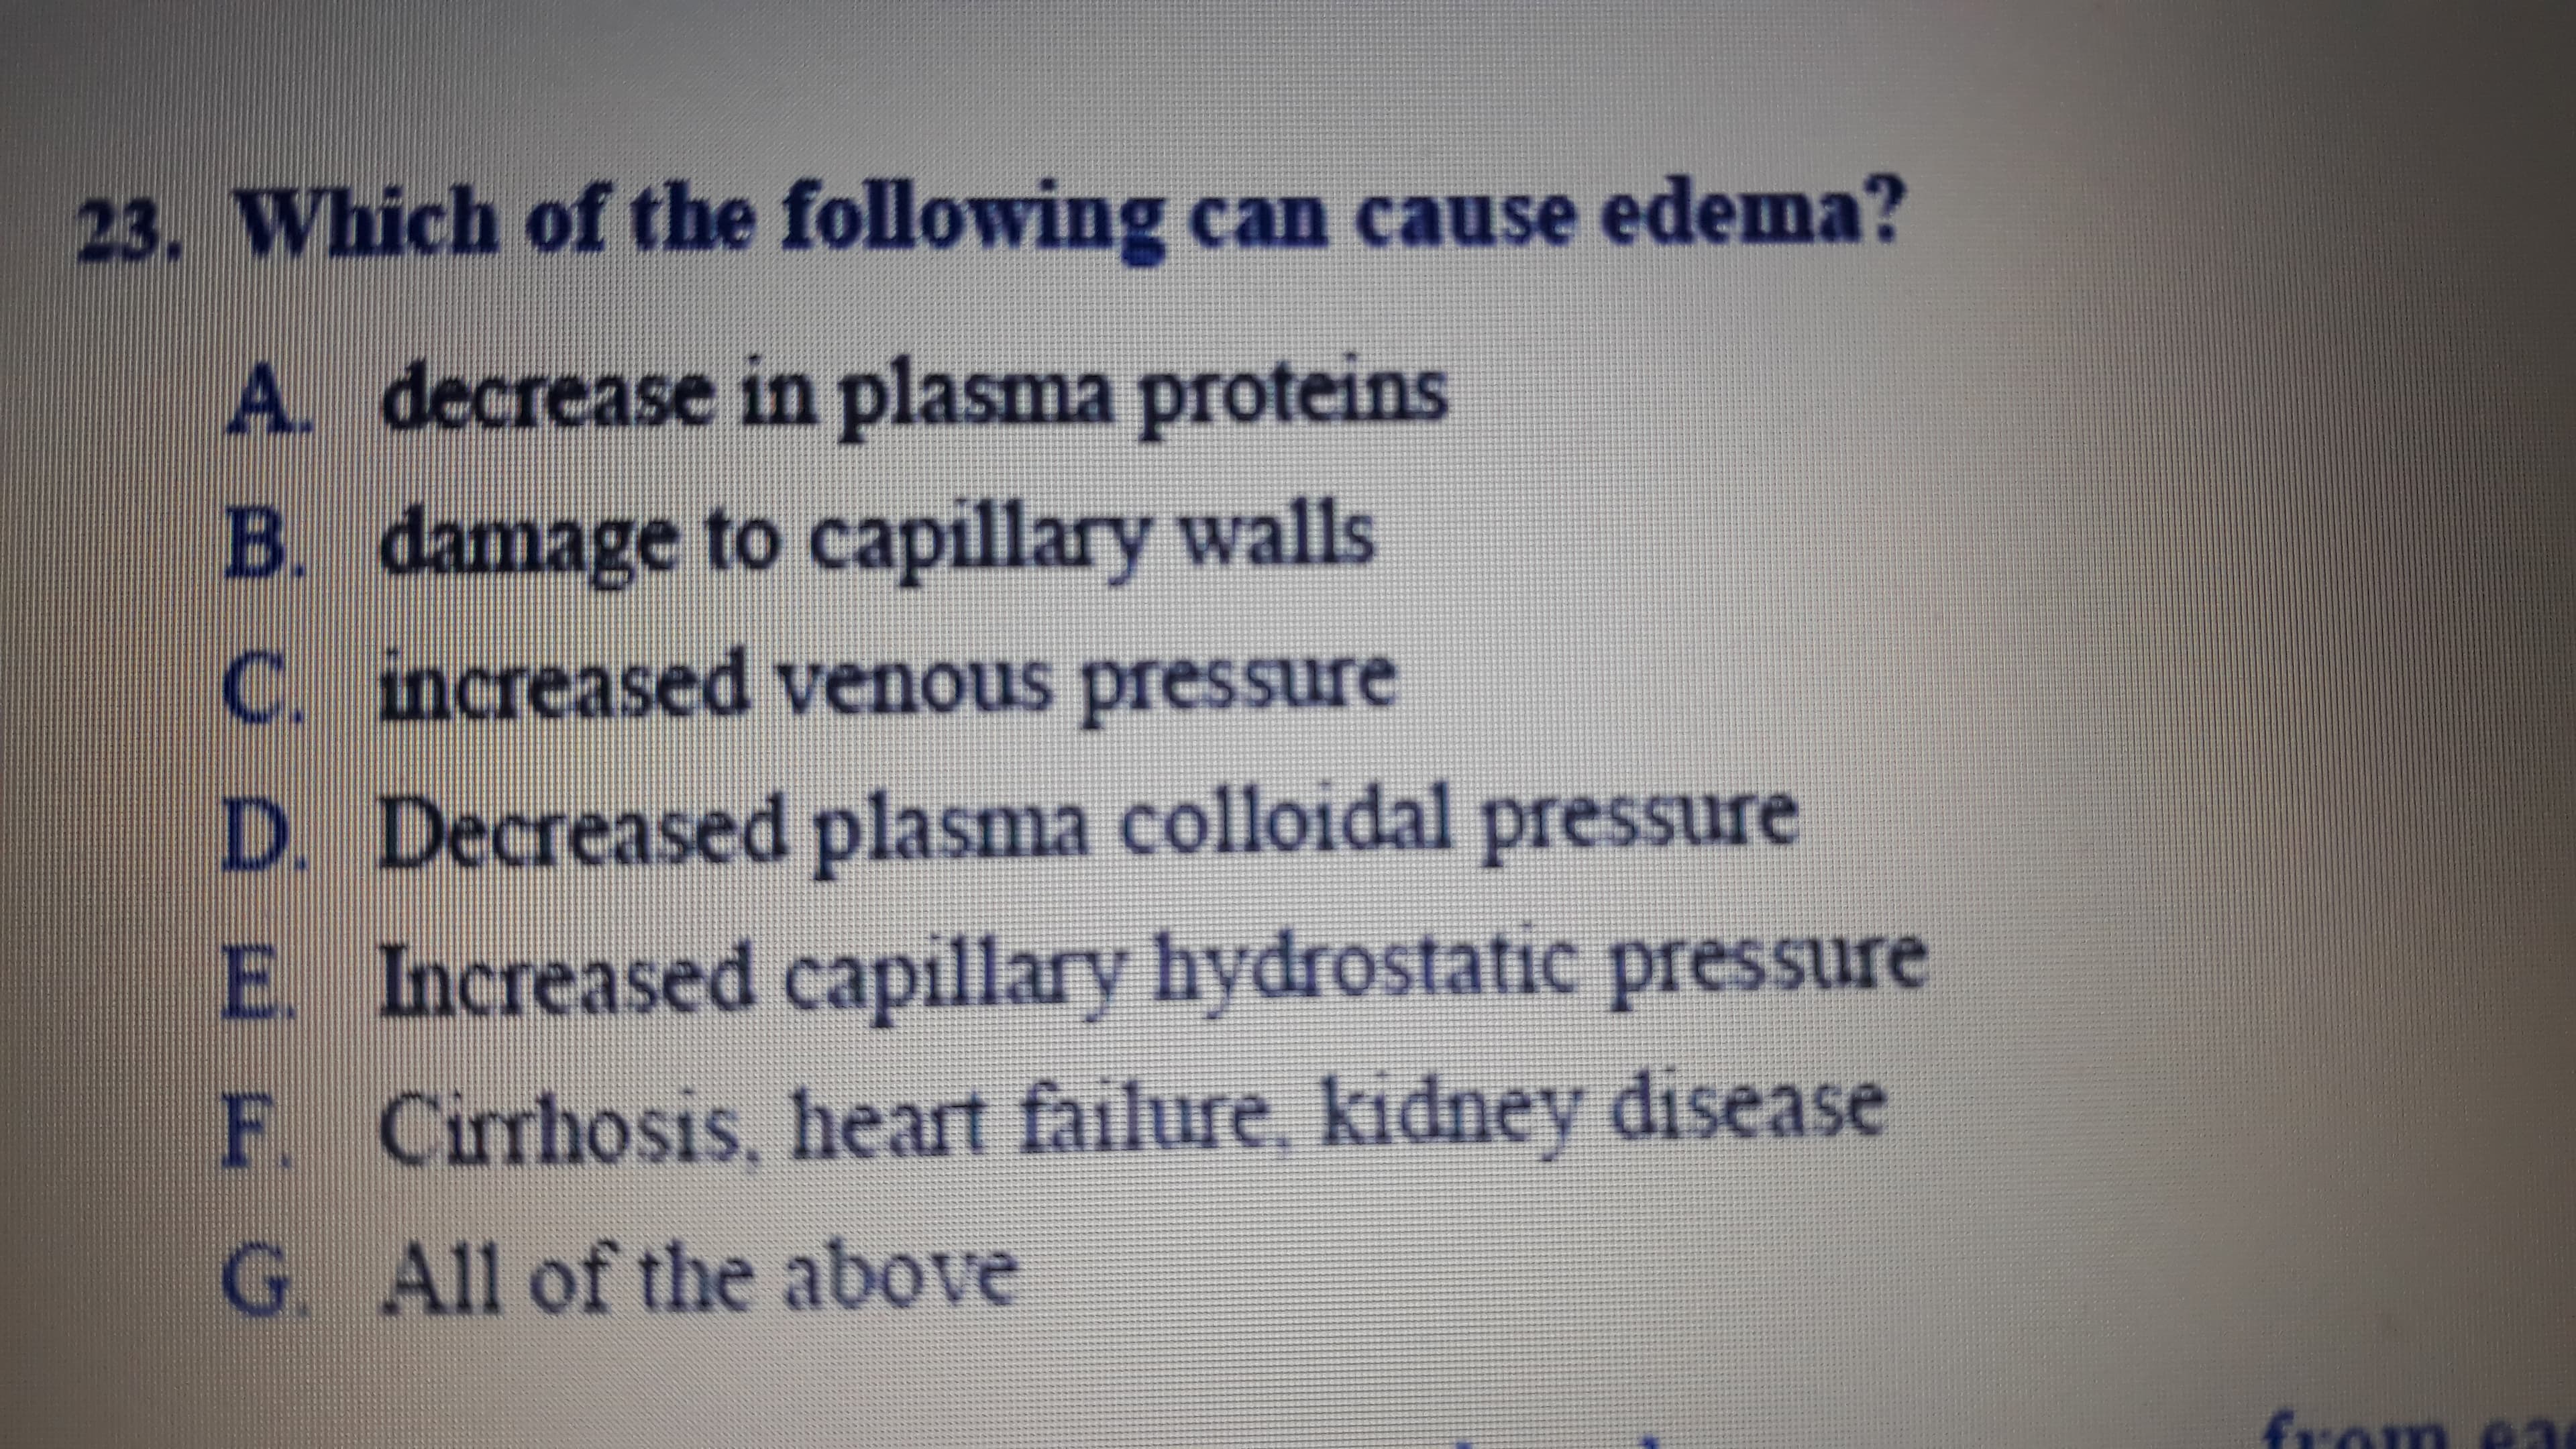 Which of the following can cause edema?
